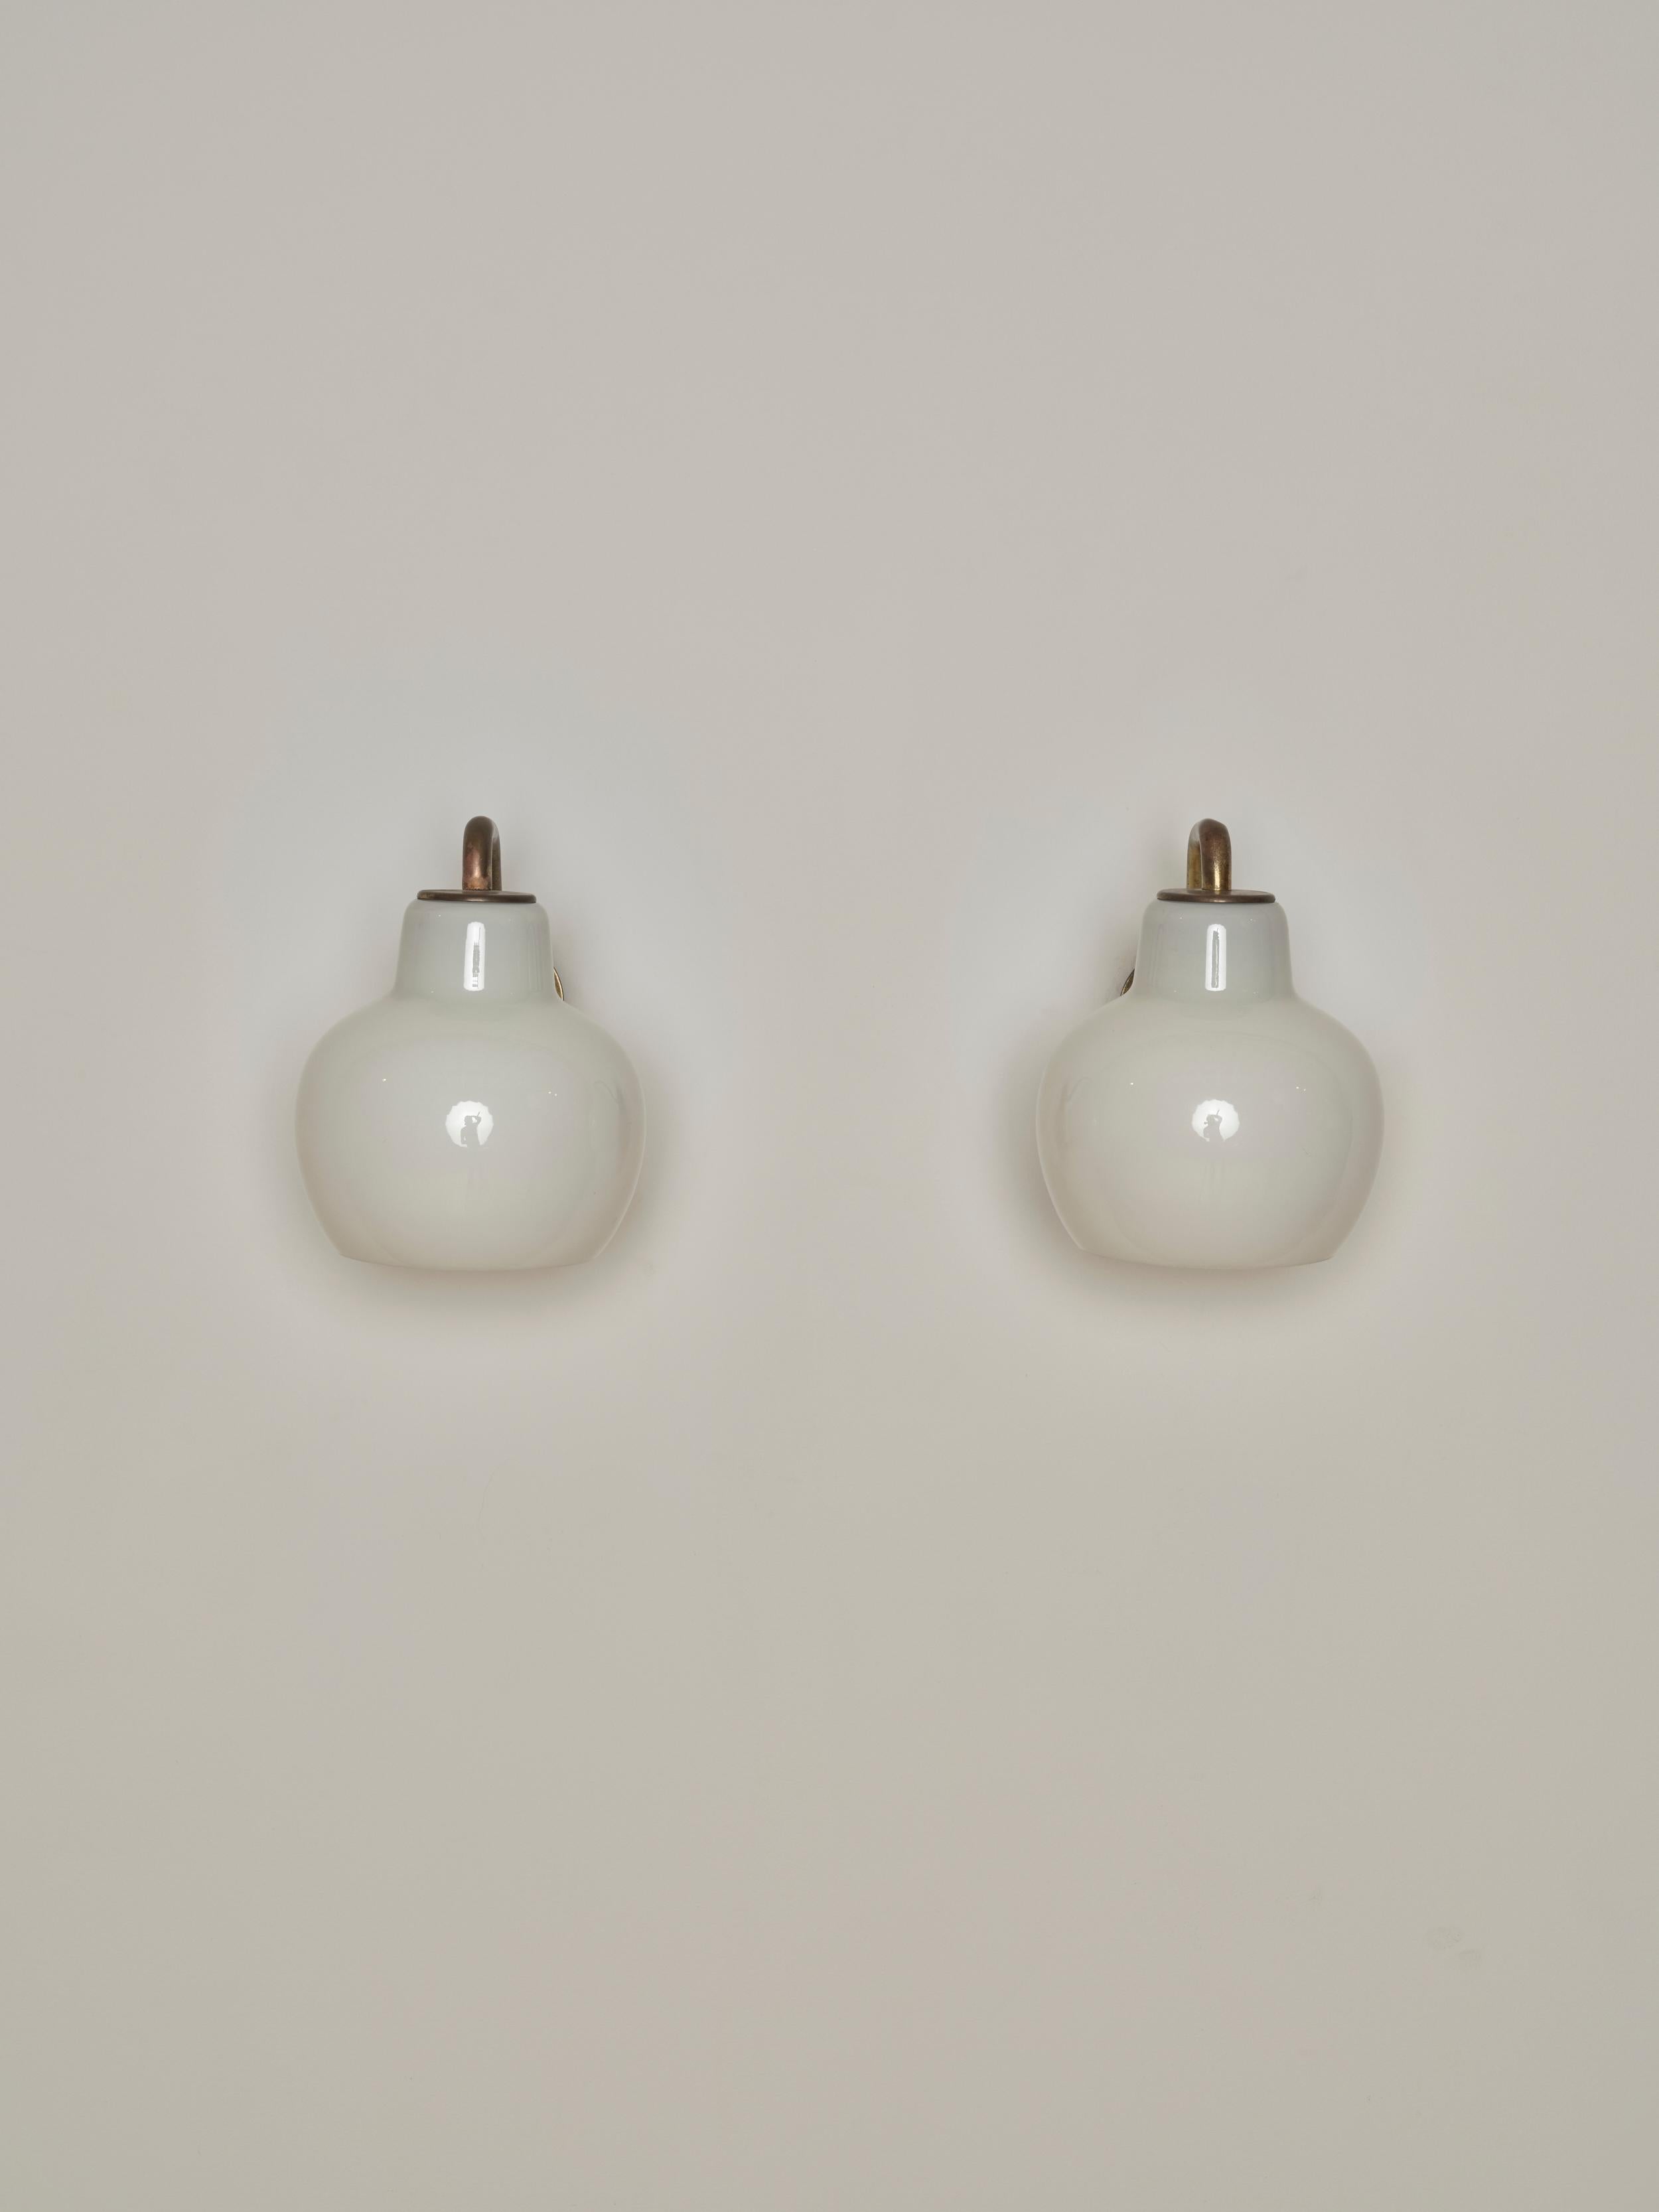 A pair of Brass and Glass Wall Sconces designed by the iconic Vilhelm Lauritzen for Louis Poulsen. These sconces feature solid brass elements while the delicate glass shades provide a soft, diffused, warm light.

